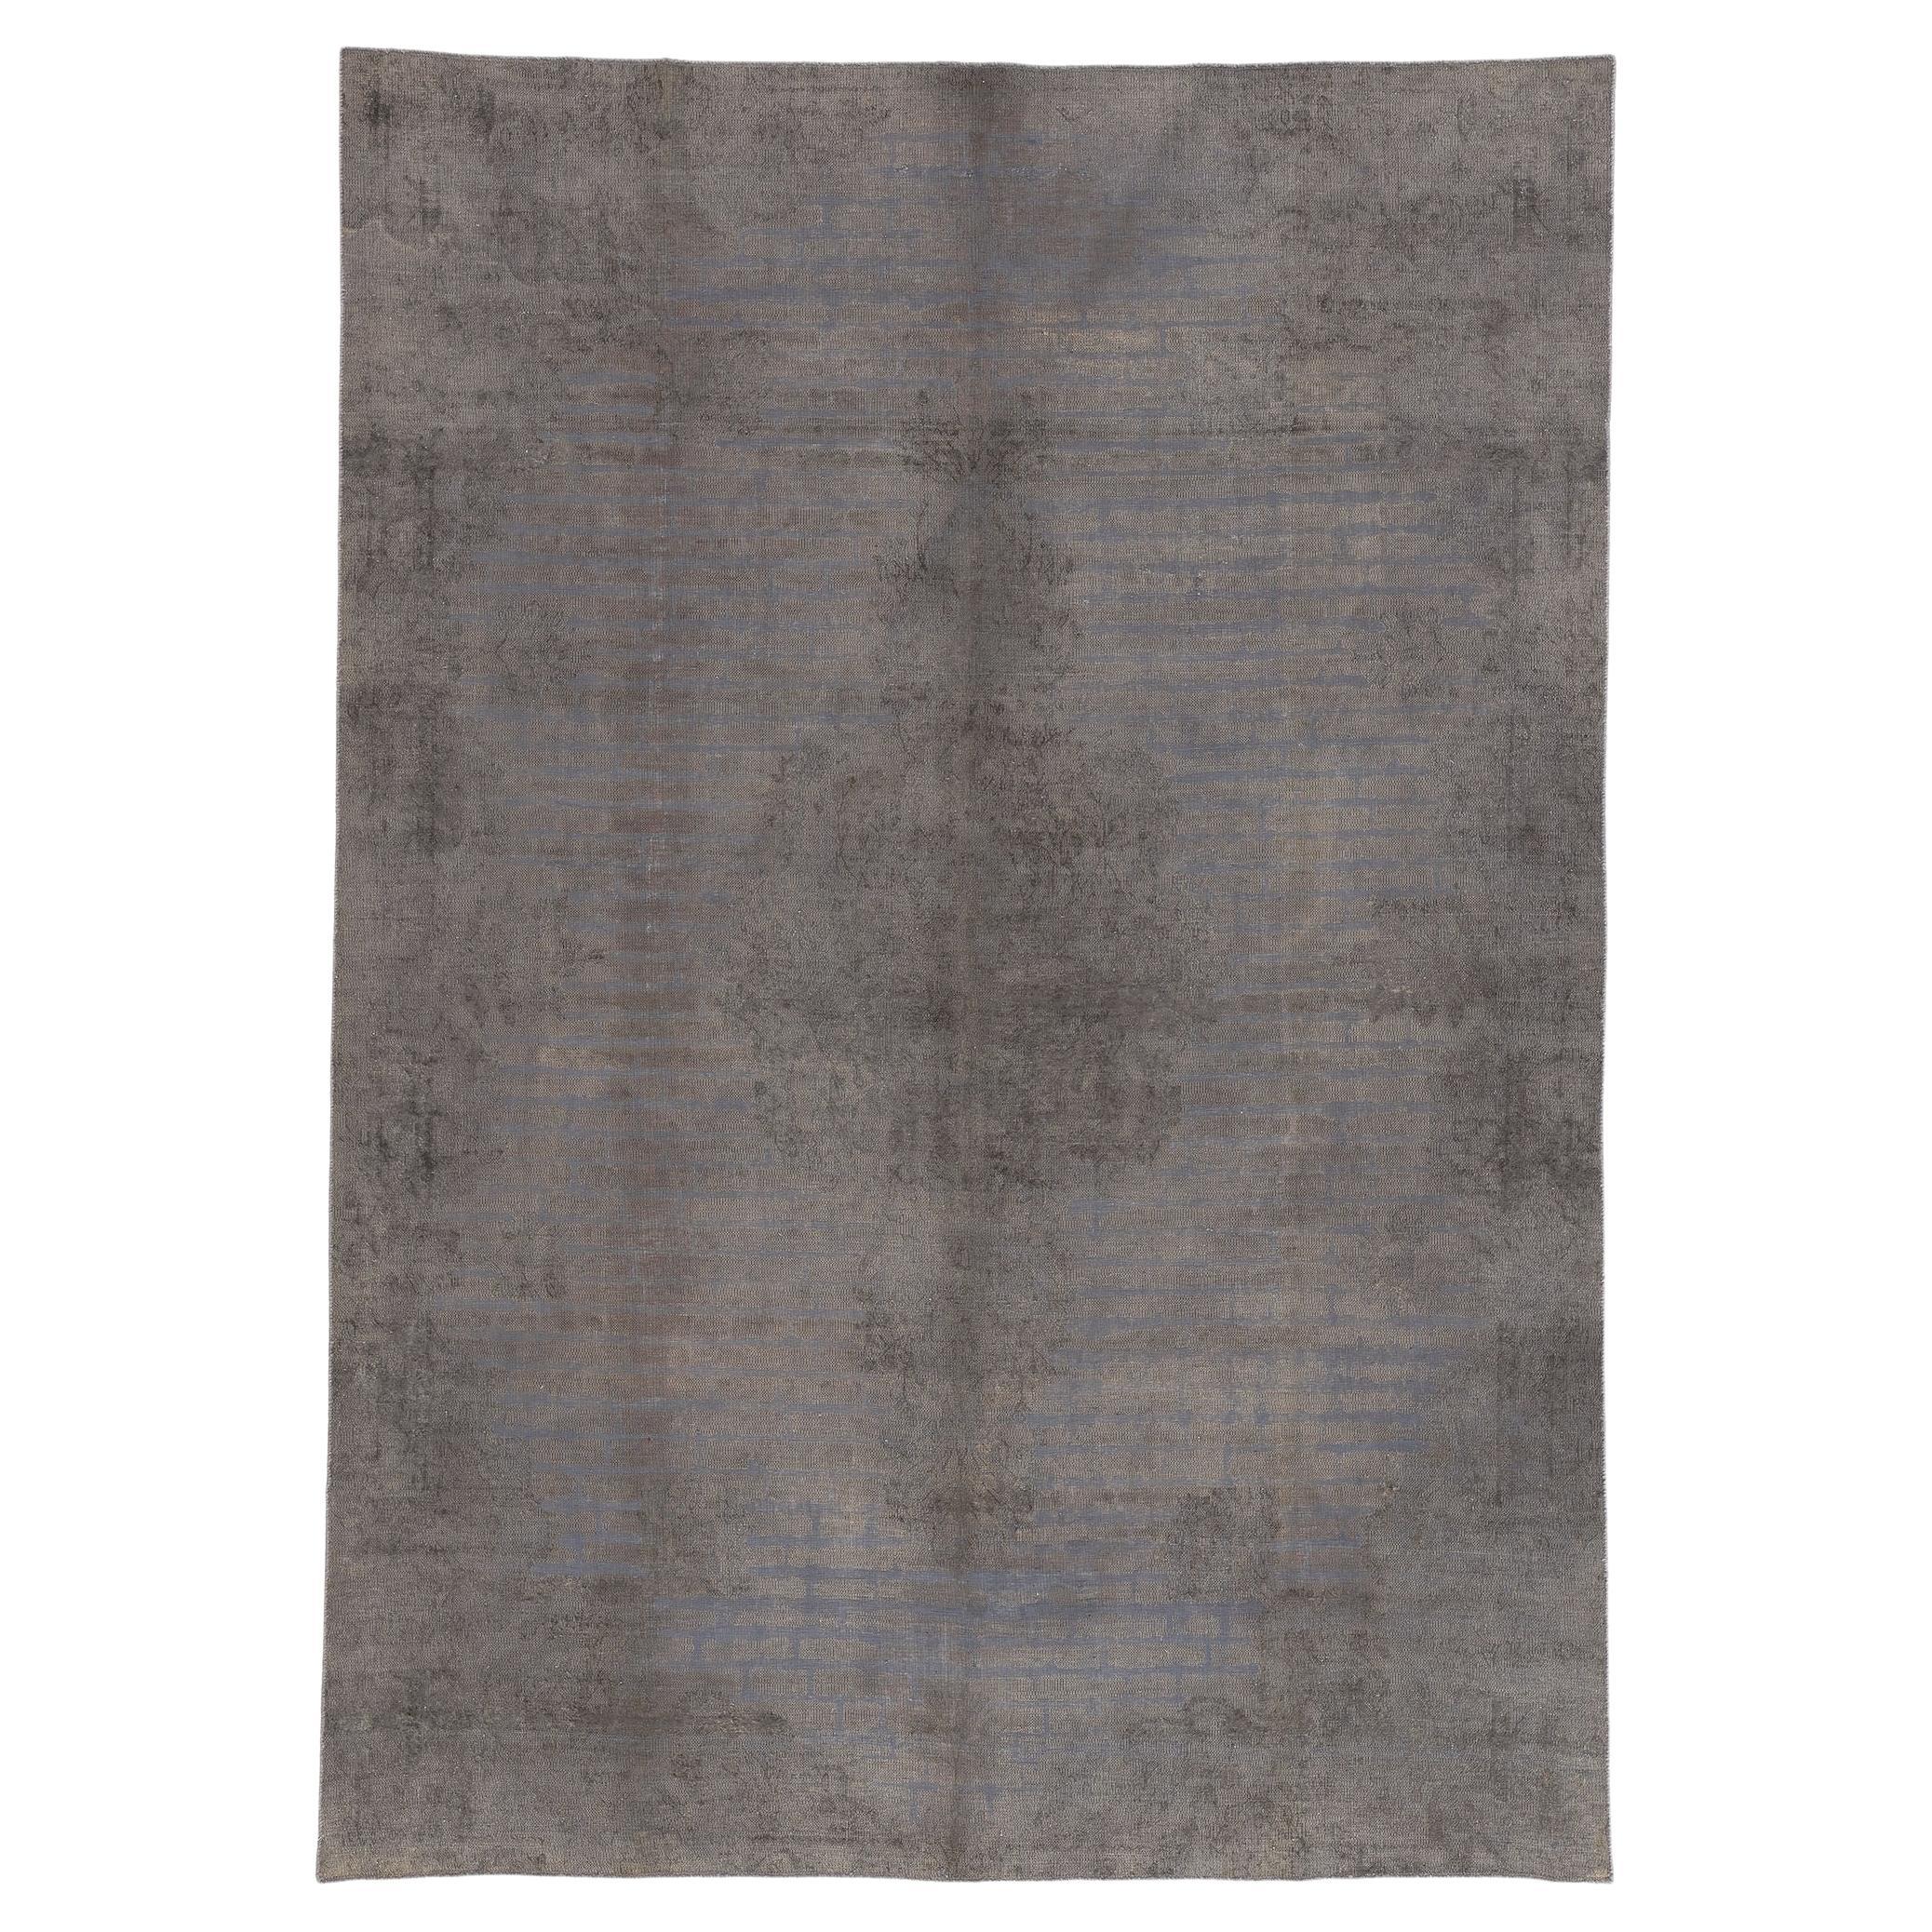 Vintage Turkish Overdyed Rug, French Industrial Meets Laid-Back Luxury